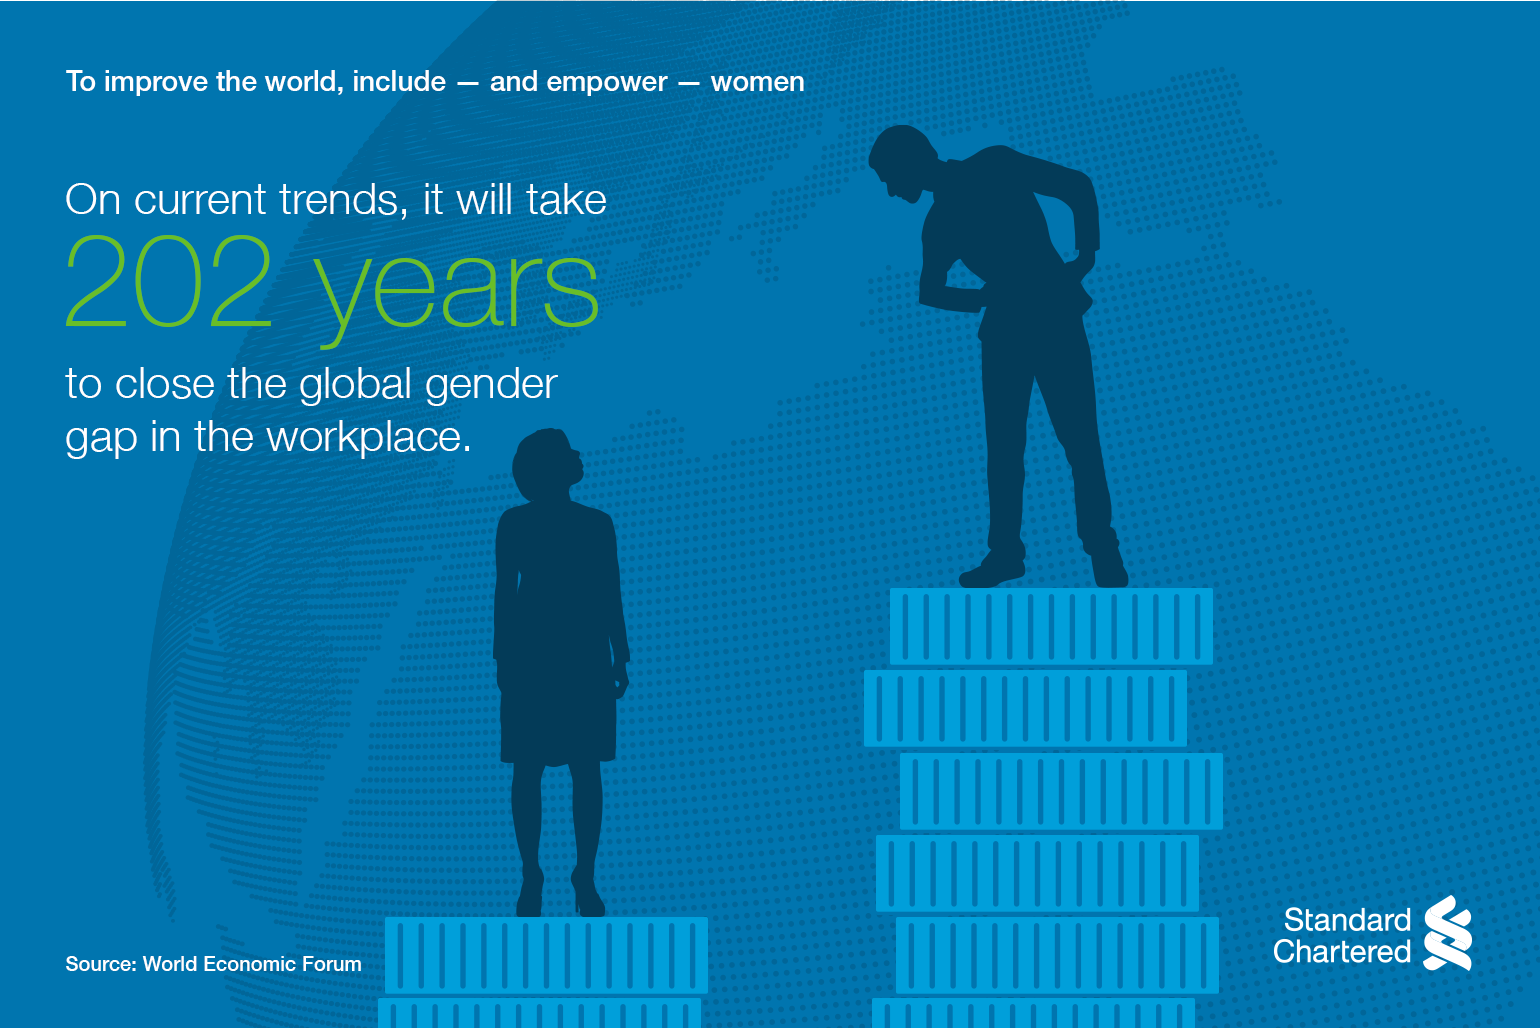 On current trends,it will take 202 years to close the global gender gap in the workplace